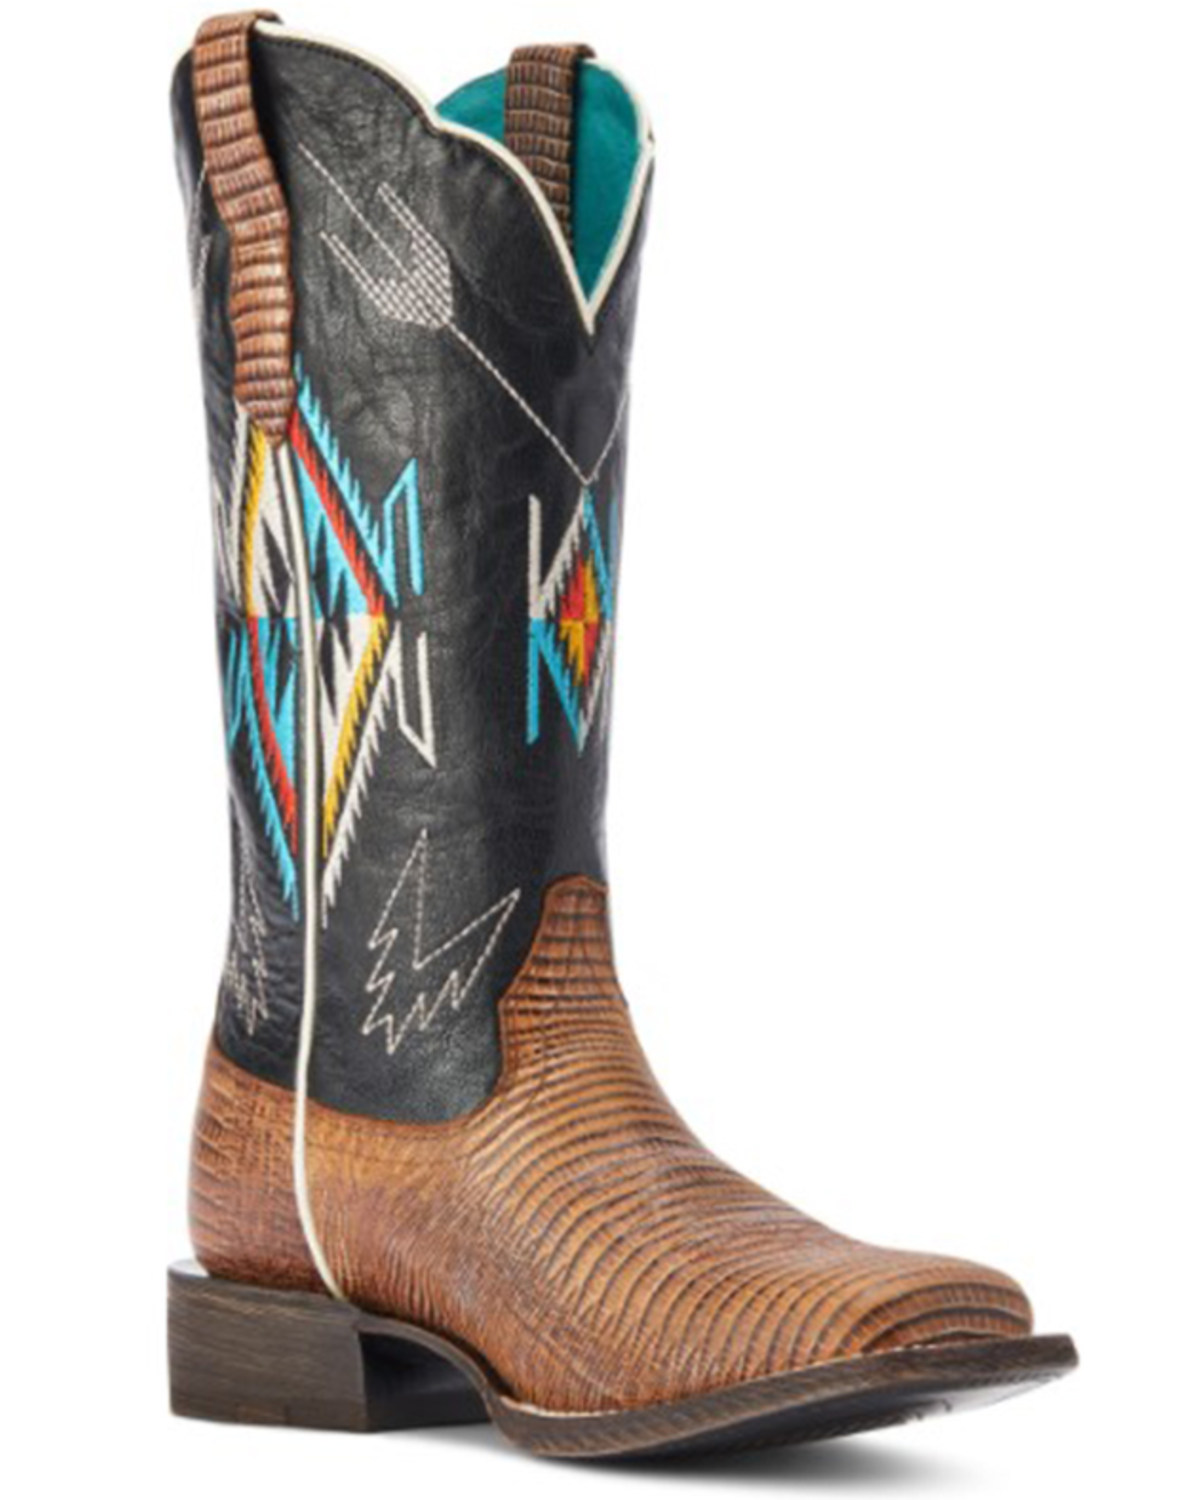 Ariat Women's Frontier Chimayo Ancient Southwestern Embroidered Western Boots - Broad Square Toe